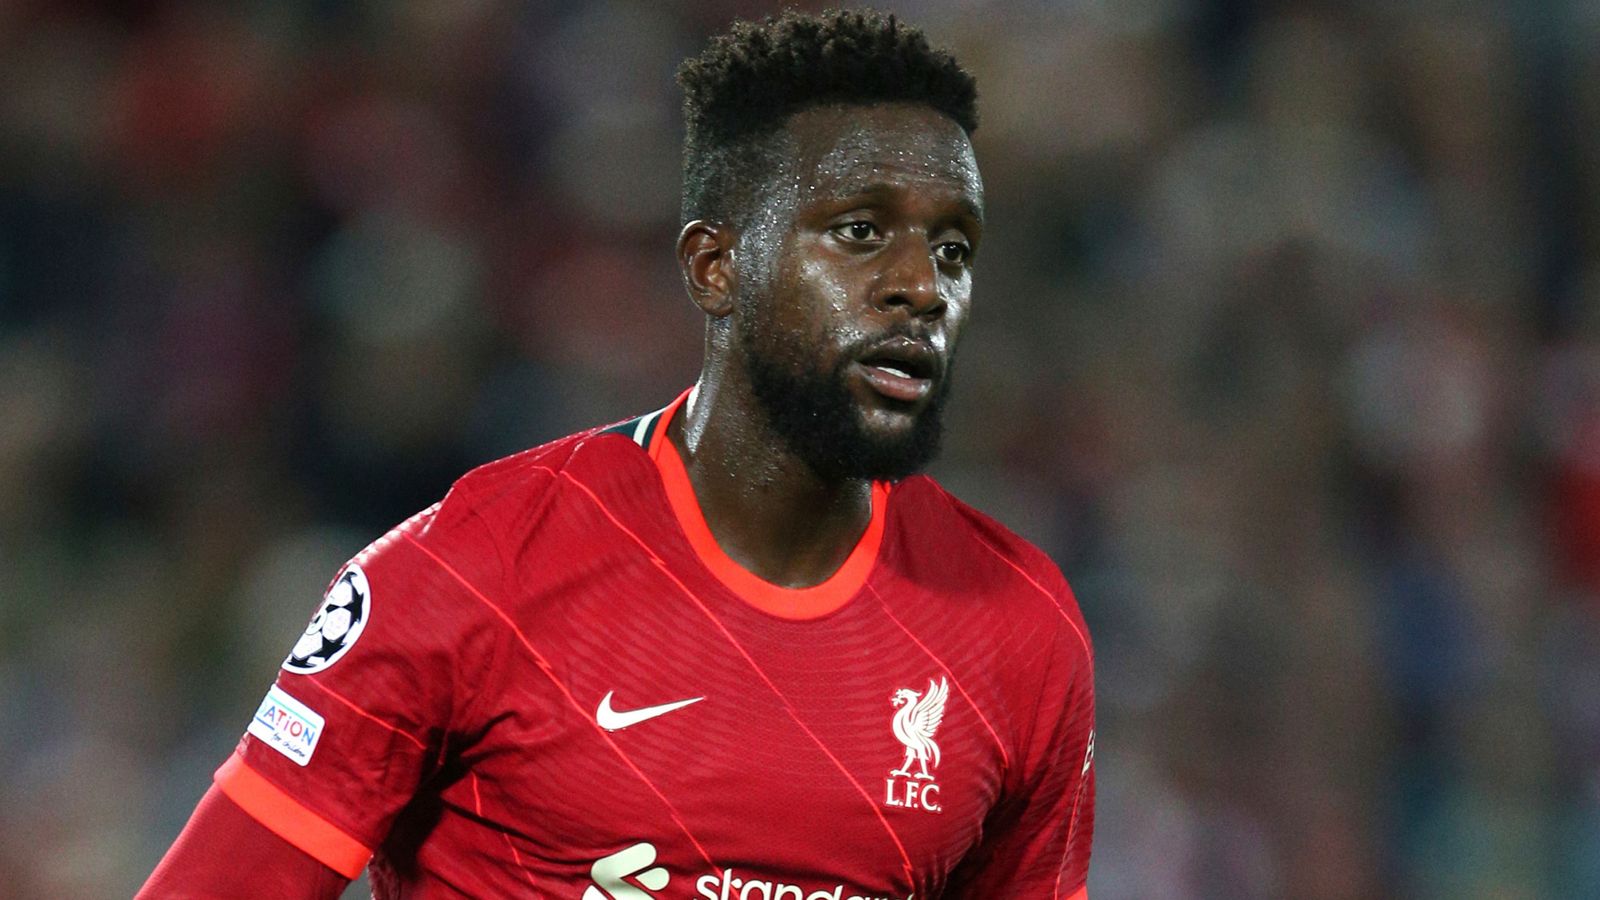 Liverpool confirm Divock Origi and Loris Karius among seven players to leave club when contacts expire